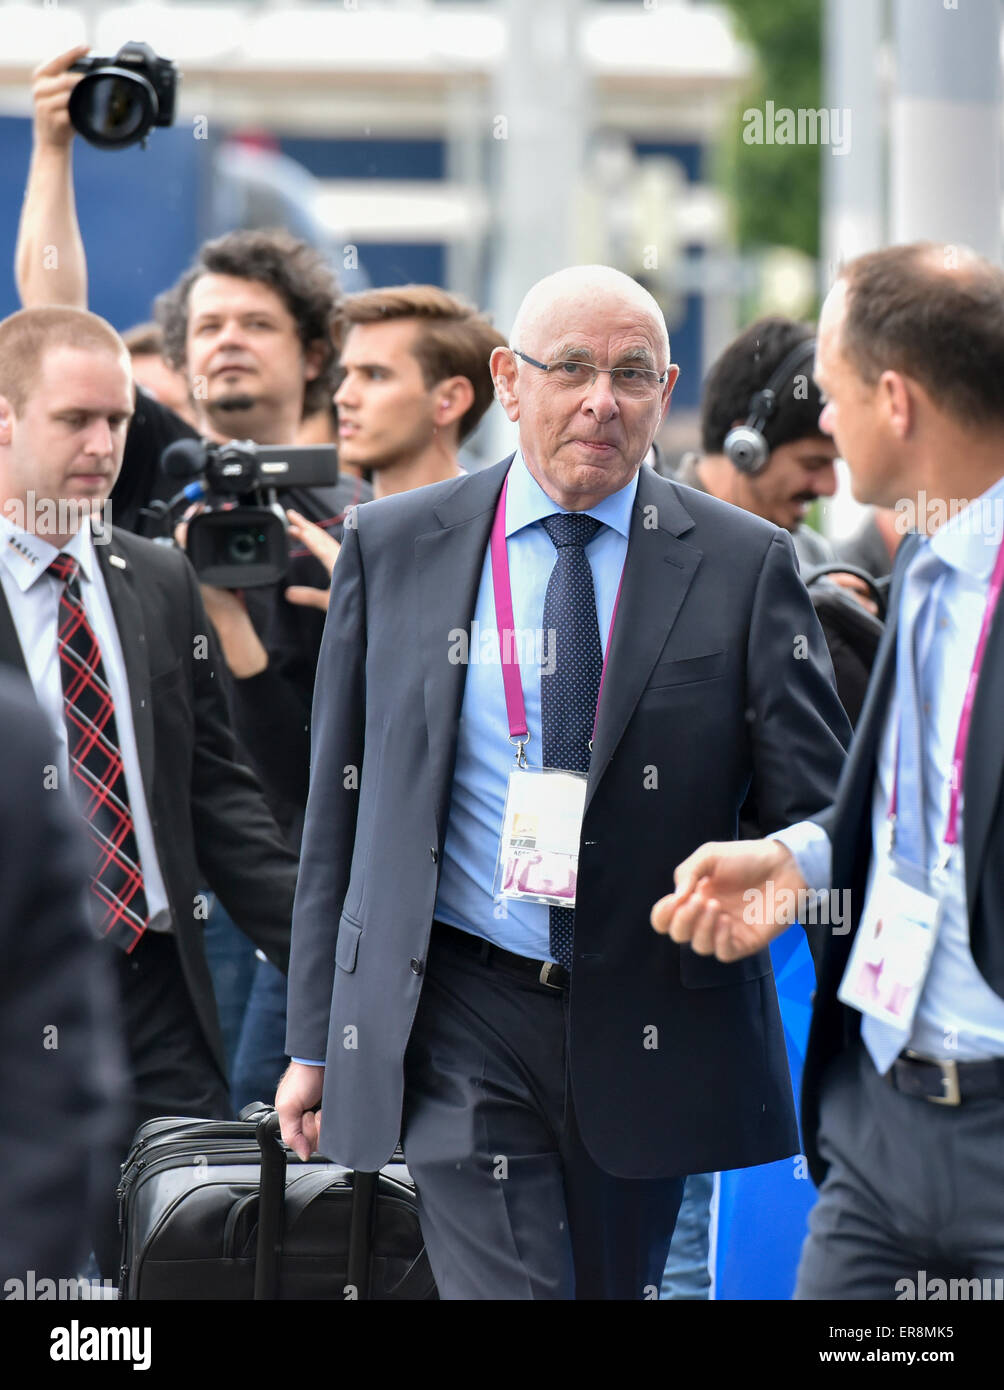 Zurich, Switzerland. 29th May, 2015. Michael Van Praag, Dutch FIFA delegate and chairman of the Royal Dutch Football Association, arrives at Zurich Hallenstadion for the 2015 FIFA congress. Credit:  thamerpic/Alamy Live News Stock Photo